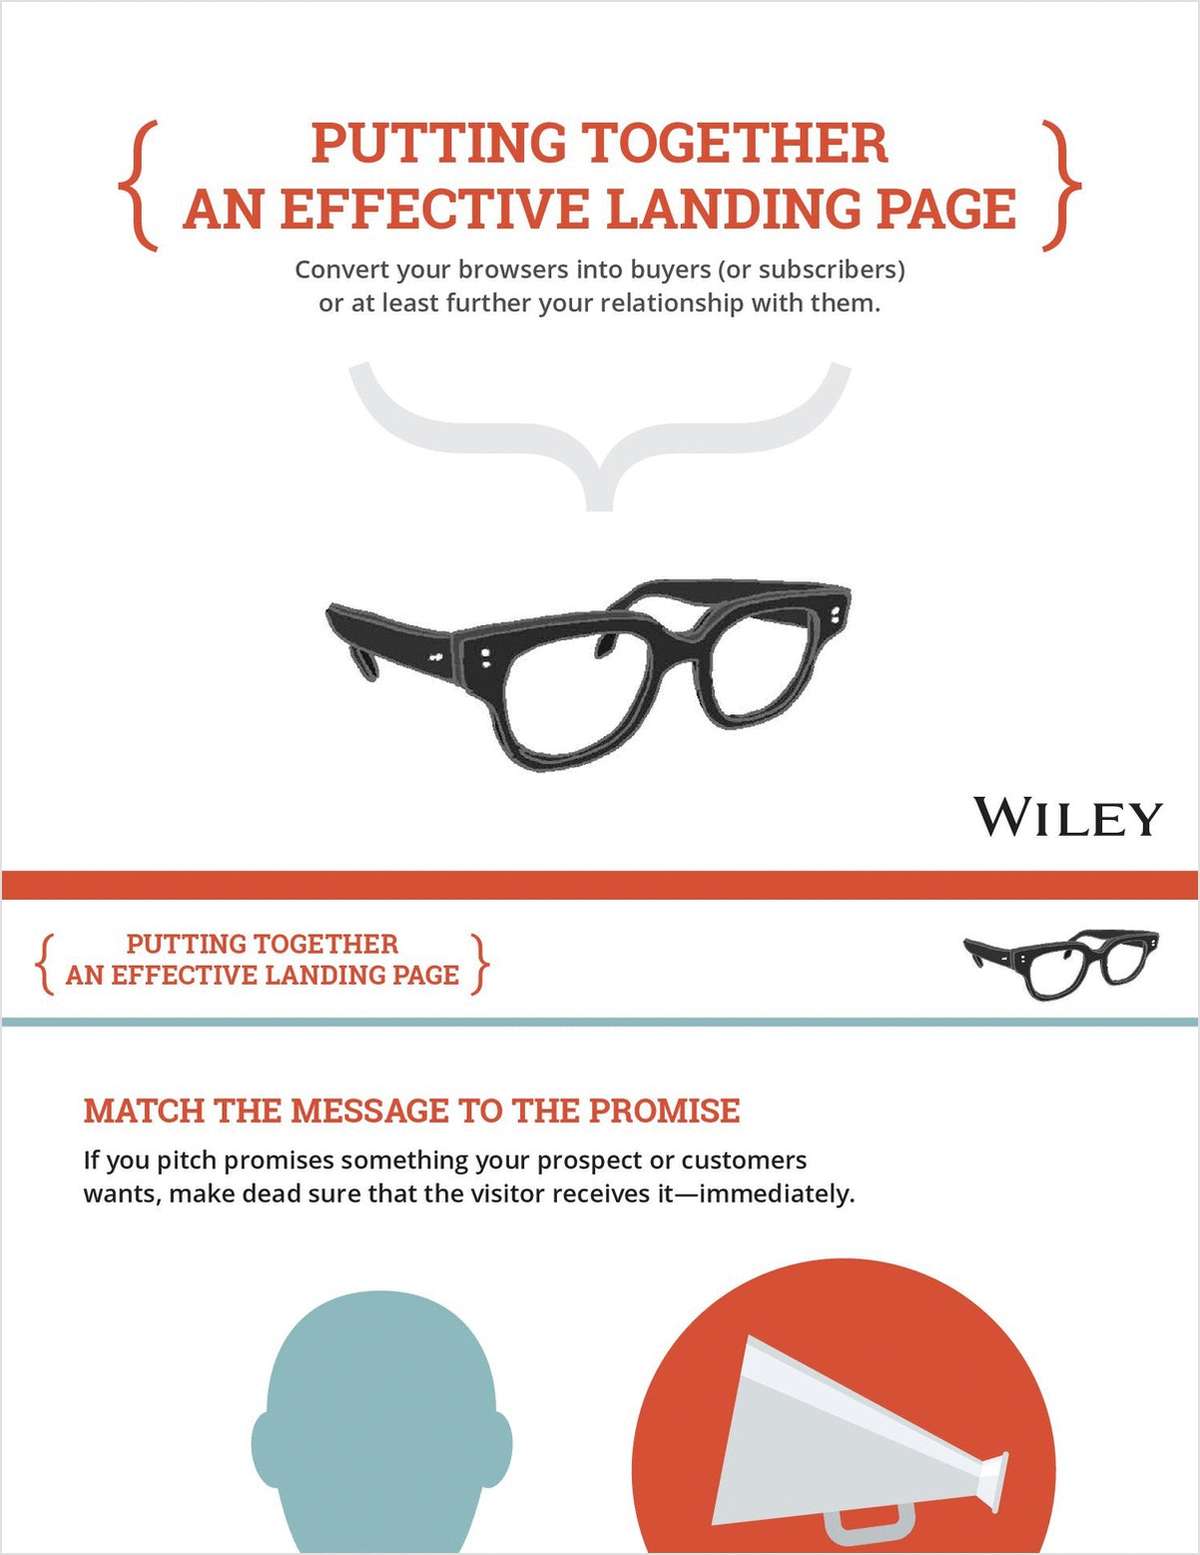 Putting Together an Effective Landing Page